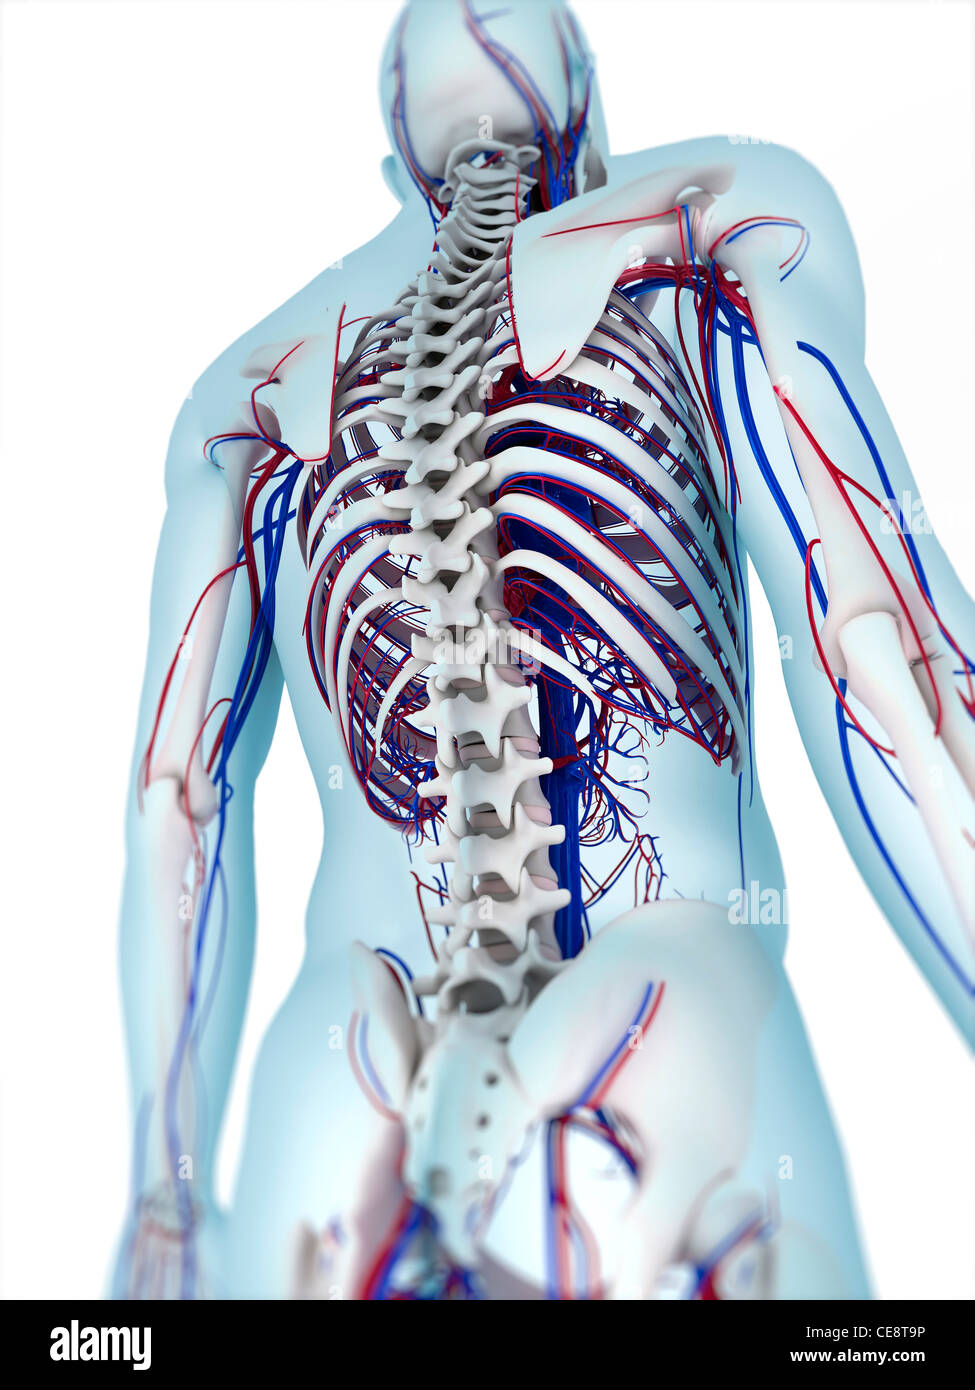 Skeleton Showing Ribs Backbone High Resolution Stock Photography and